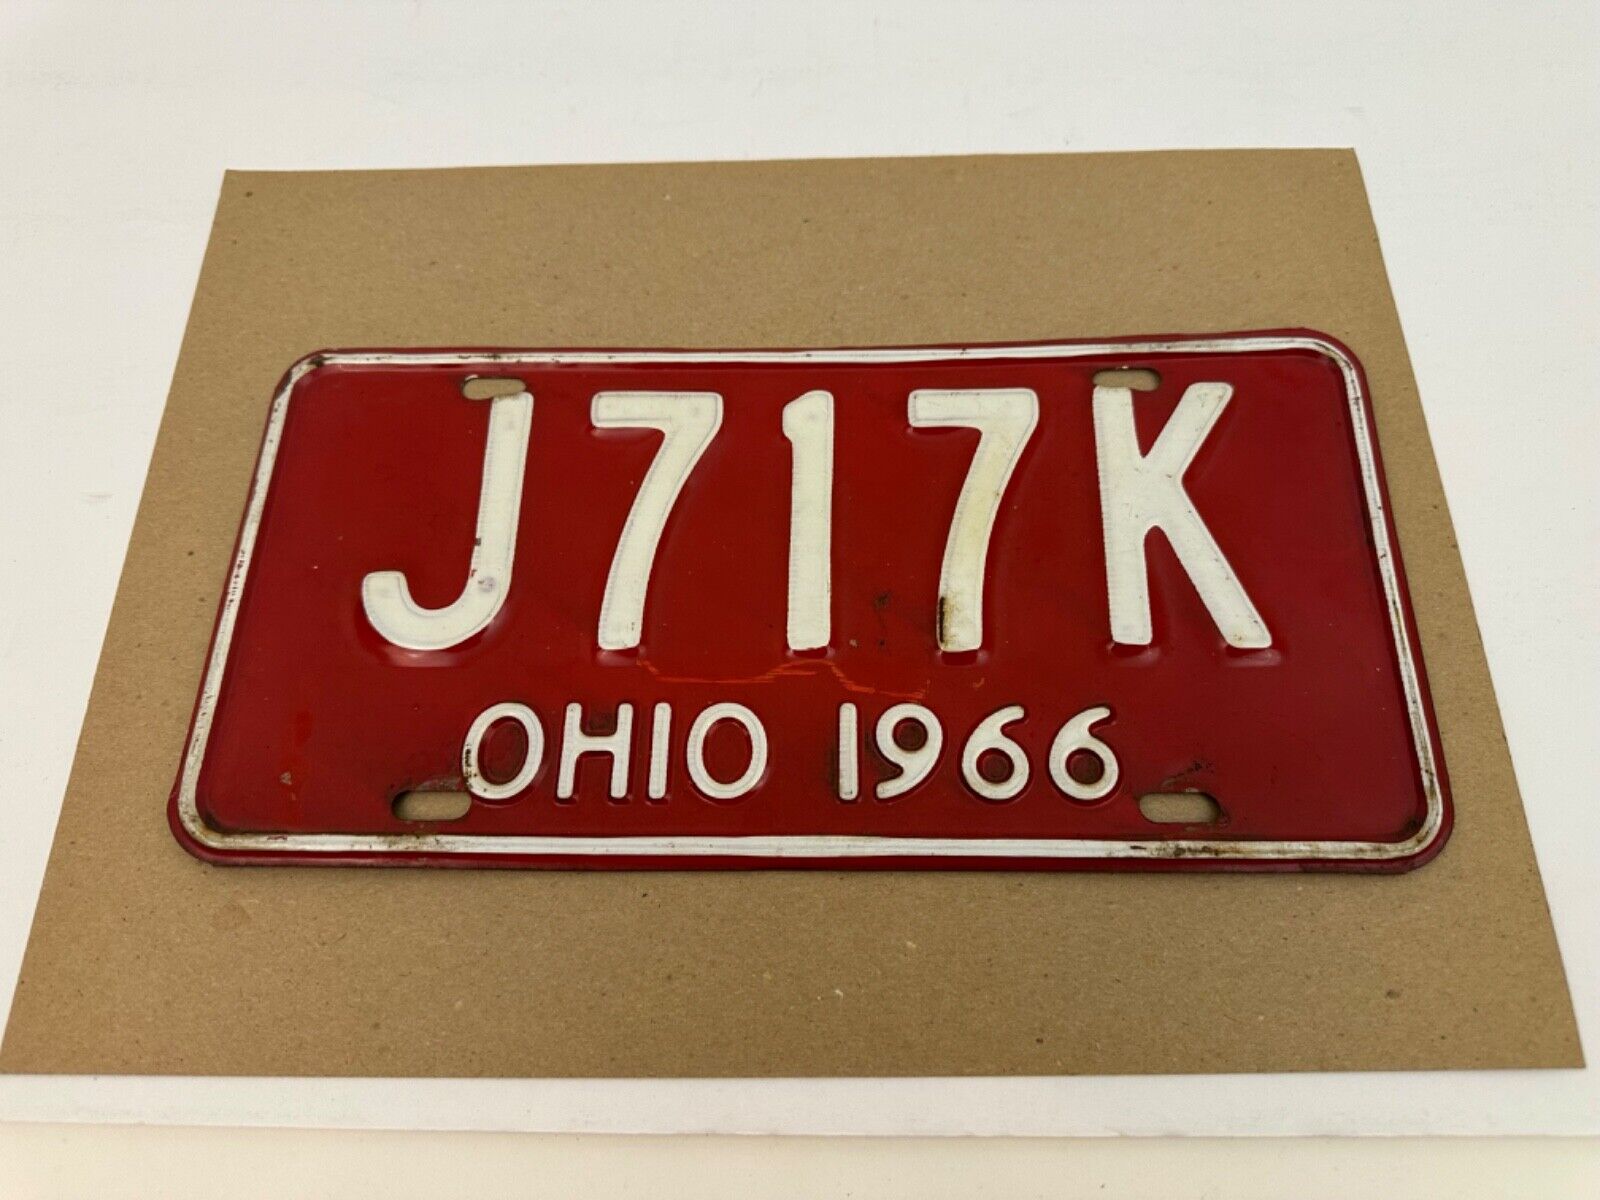 Vintage Original 1966 OHIO, OH, License Plate J 717 K, White Text, Red Plate